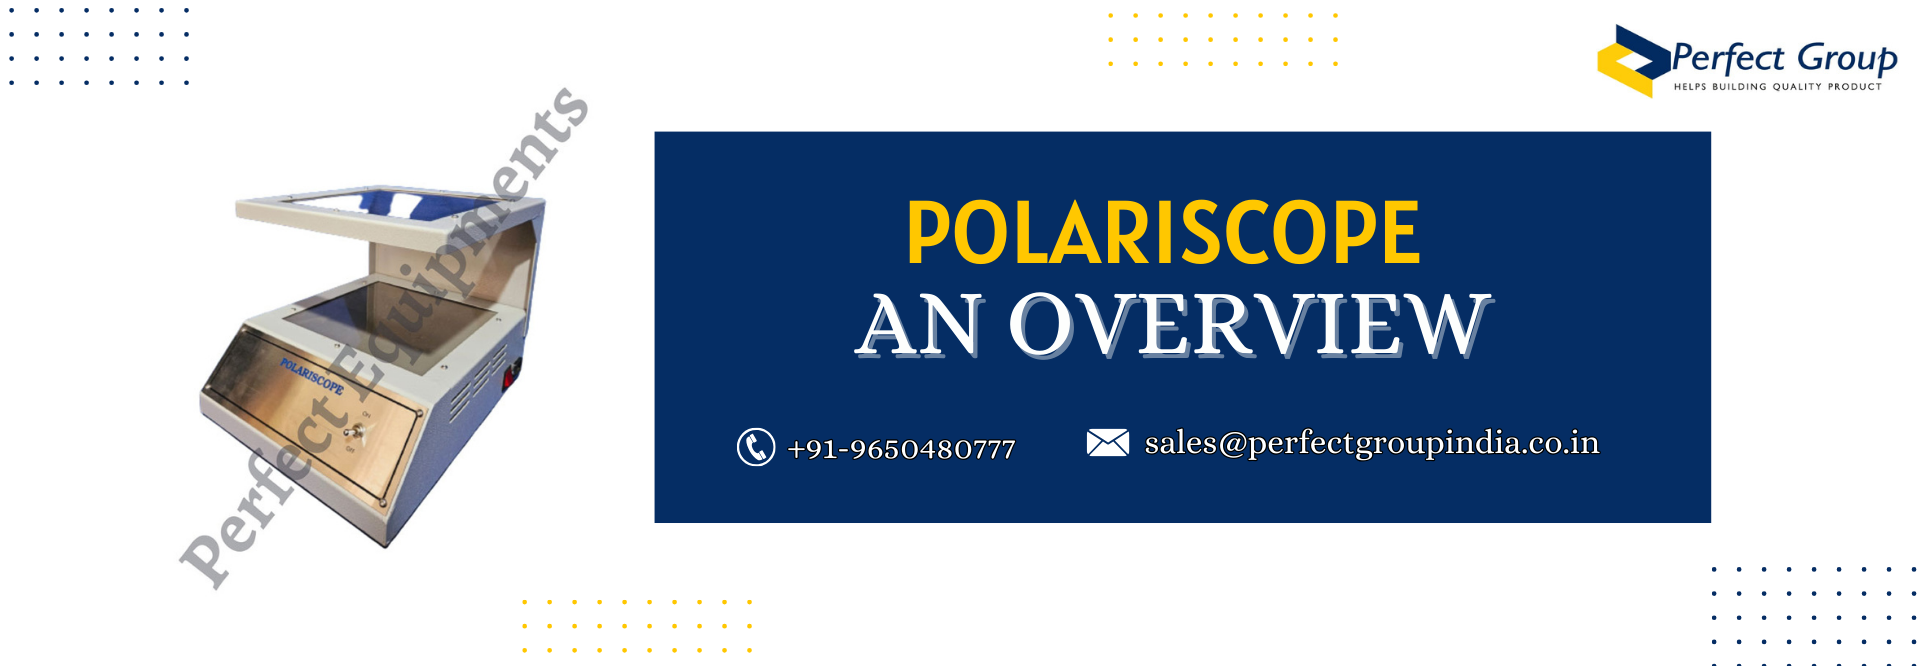 Polariscope - An Overview